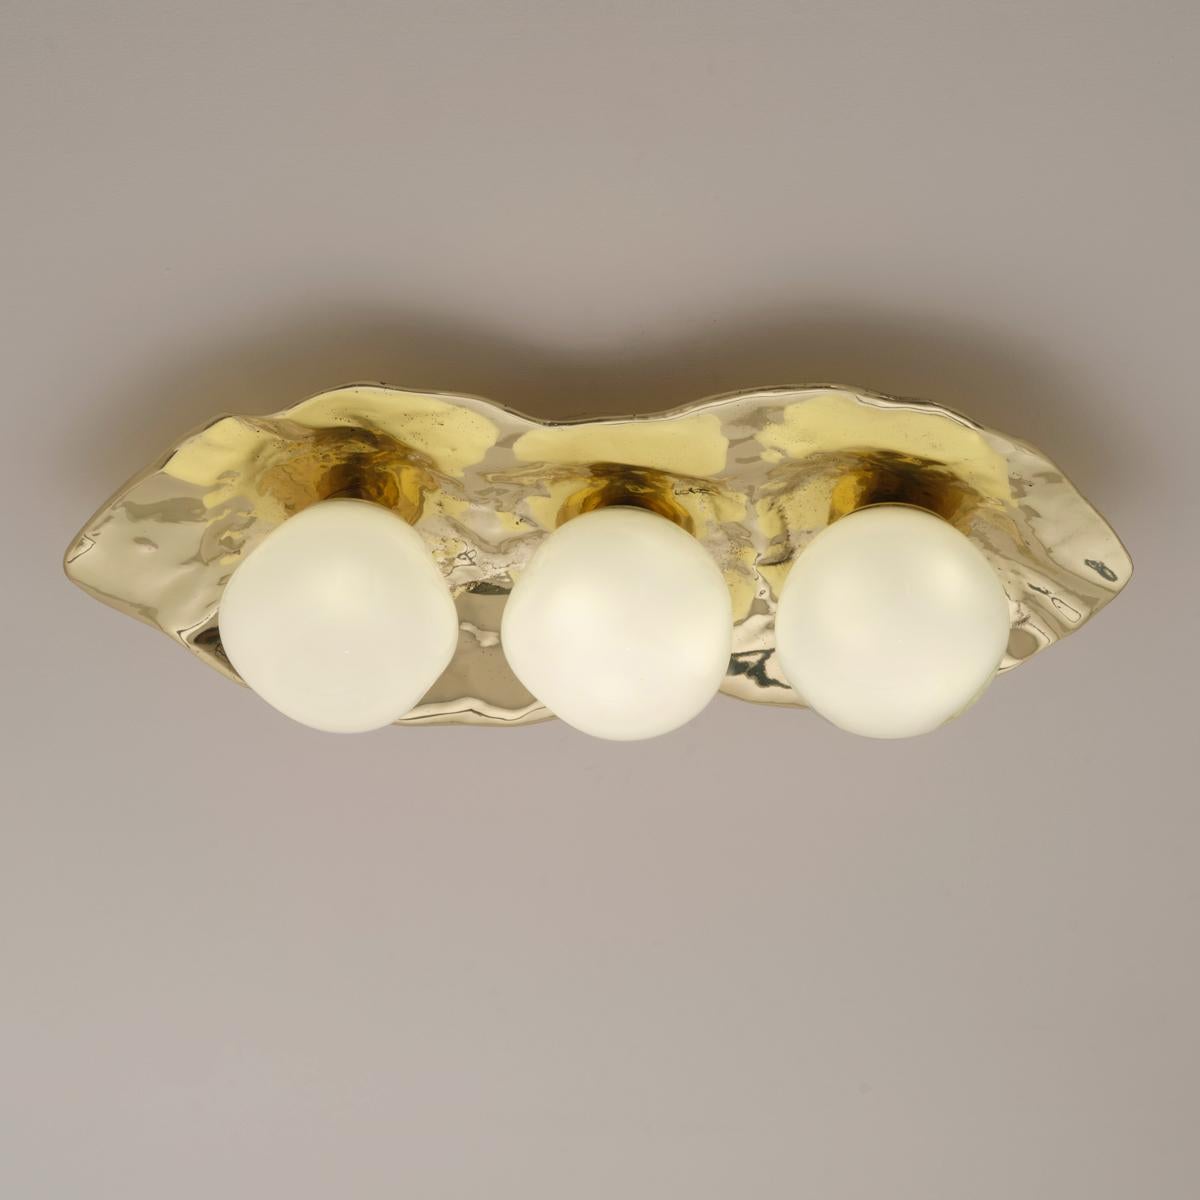 The Shell ceiling light is forged from brass to create an organic shell nestling three of our handblown Sfera glasses made in Murano.

Shown in the primary images in polished brass-subsequent pictures show the fixture in other featured